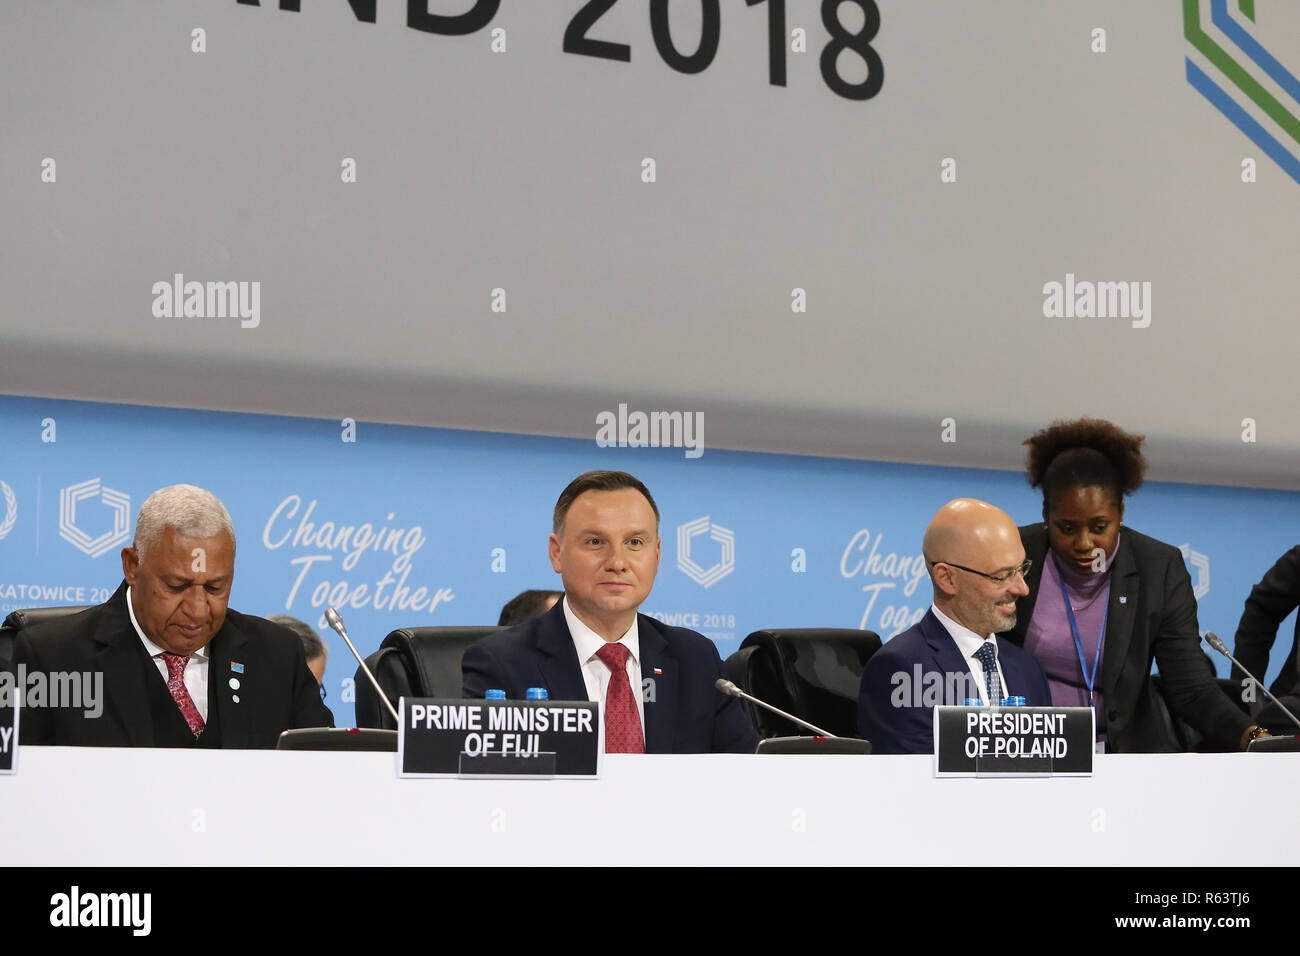 L-R Frank Bainimarama, Prime Minister of Fiji, Andrzej Duda, President of Poland, and Michal Kurtyka, President of COP 24 conference, are seen during Stock Photo